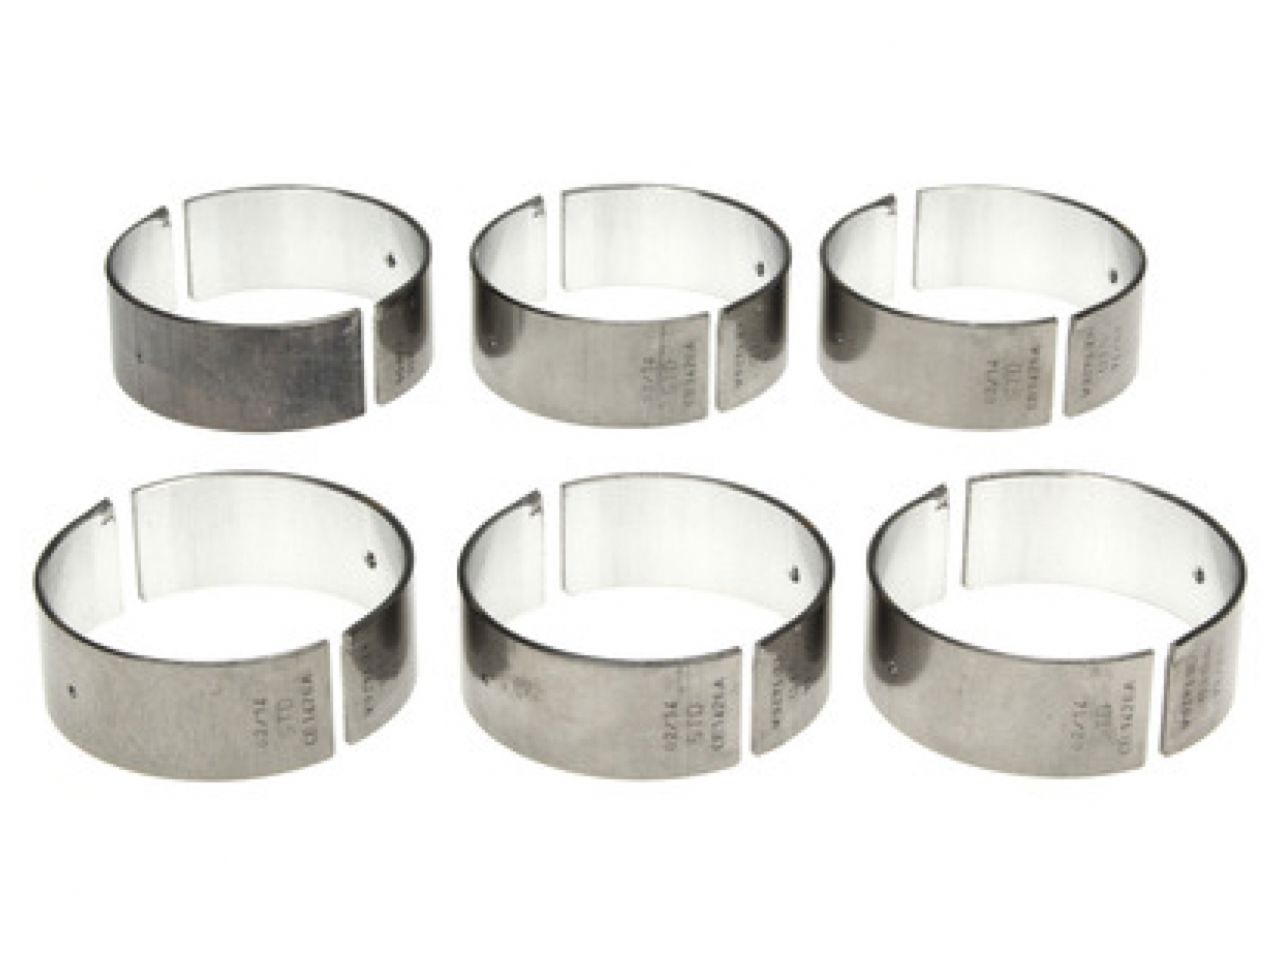 Clevite Rod Bearings CB723A10(6) Item Image